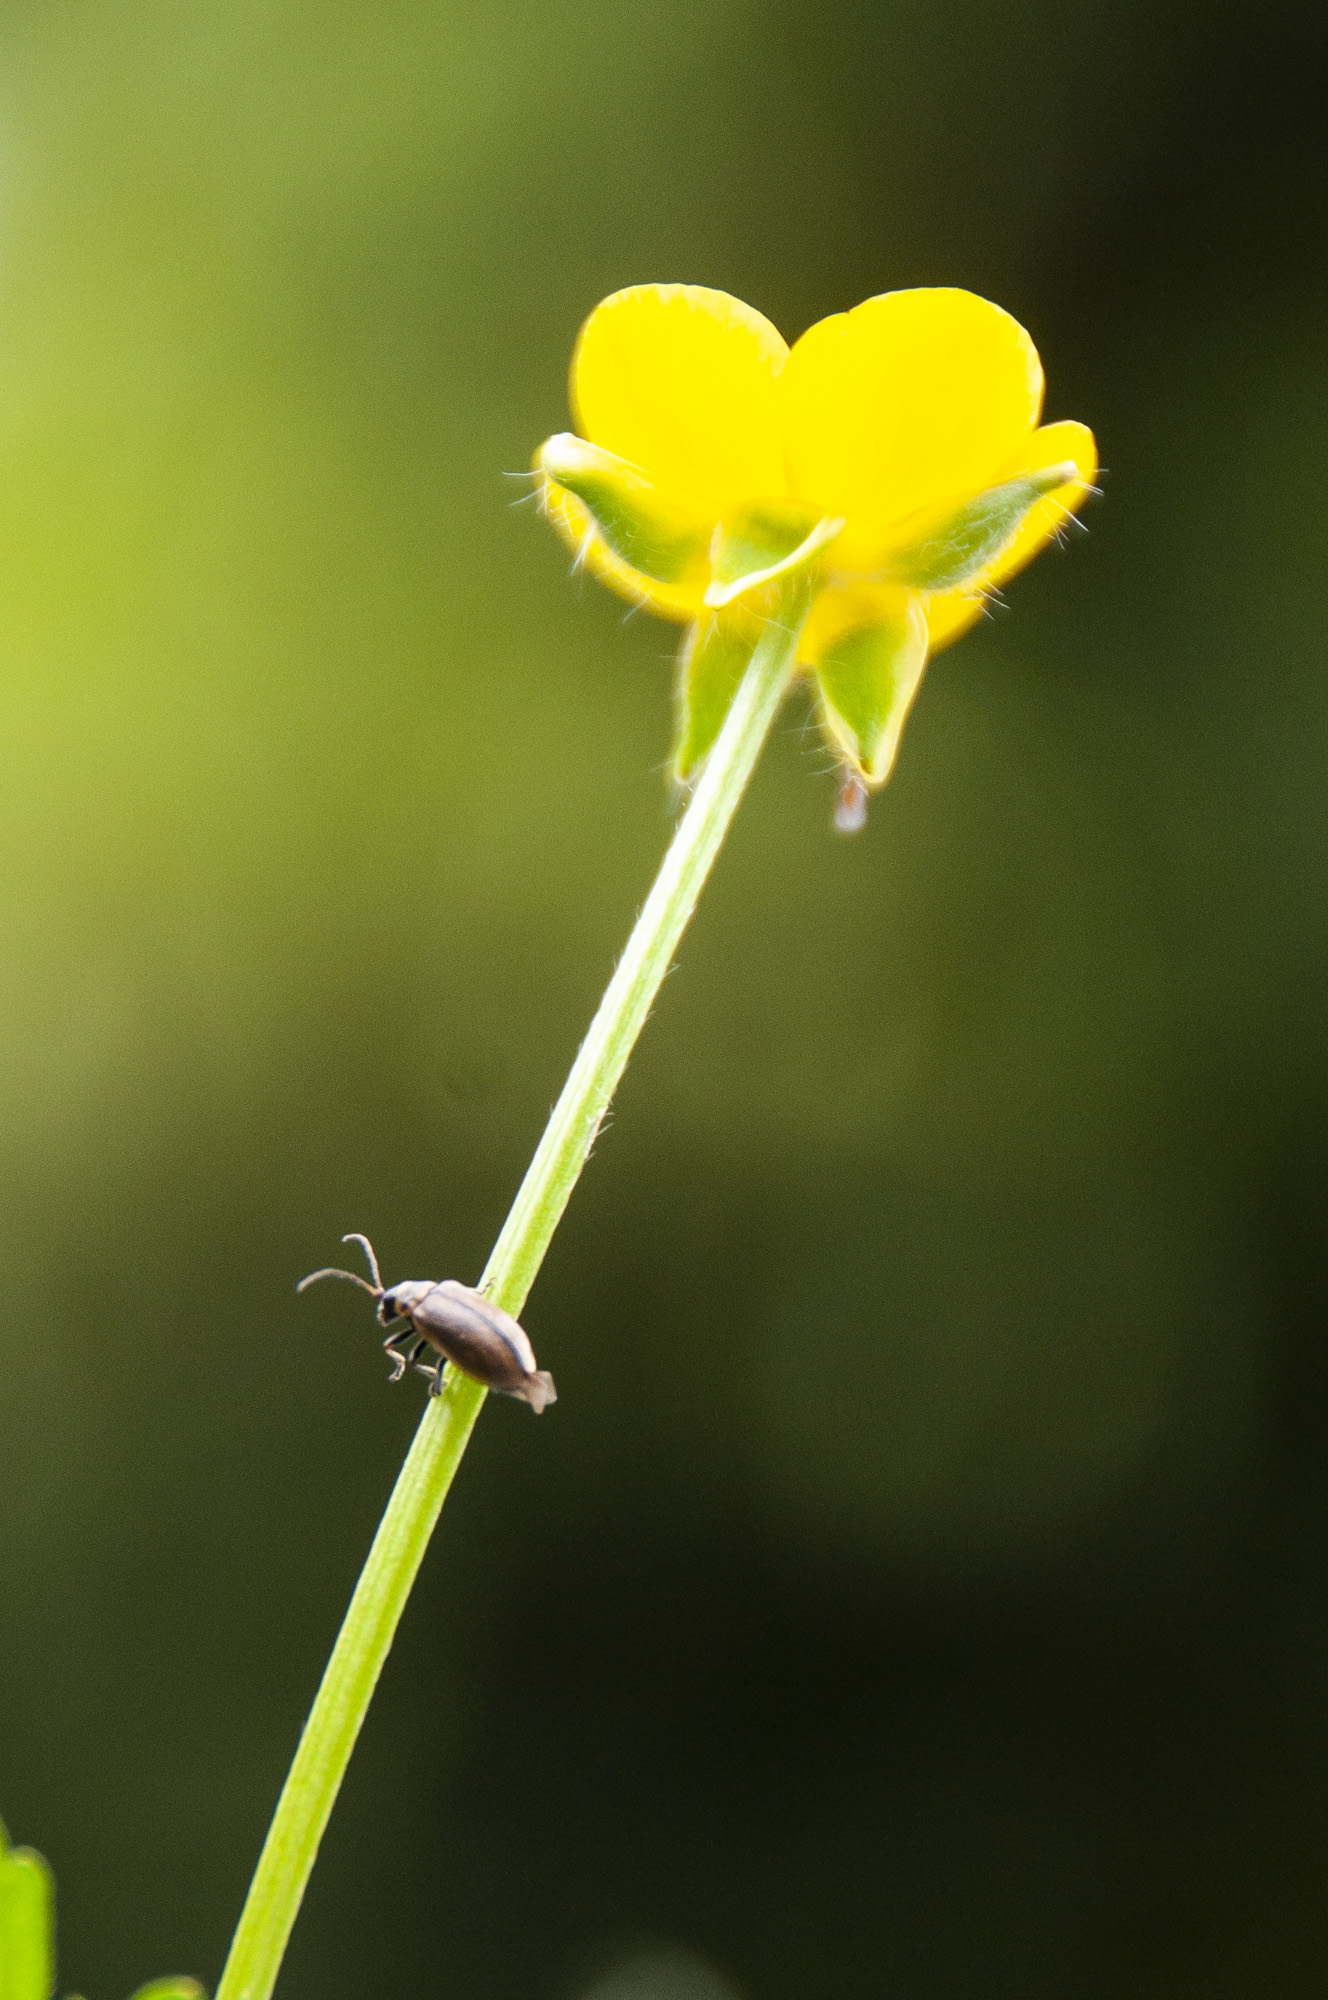 Insect on a stem of a flower